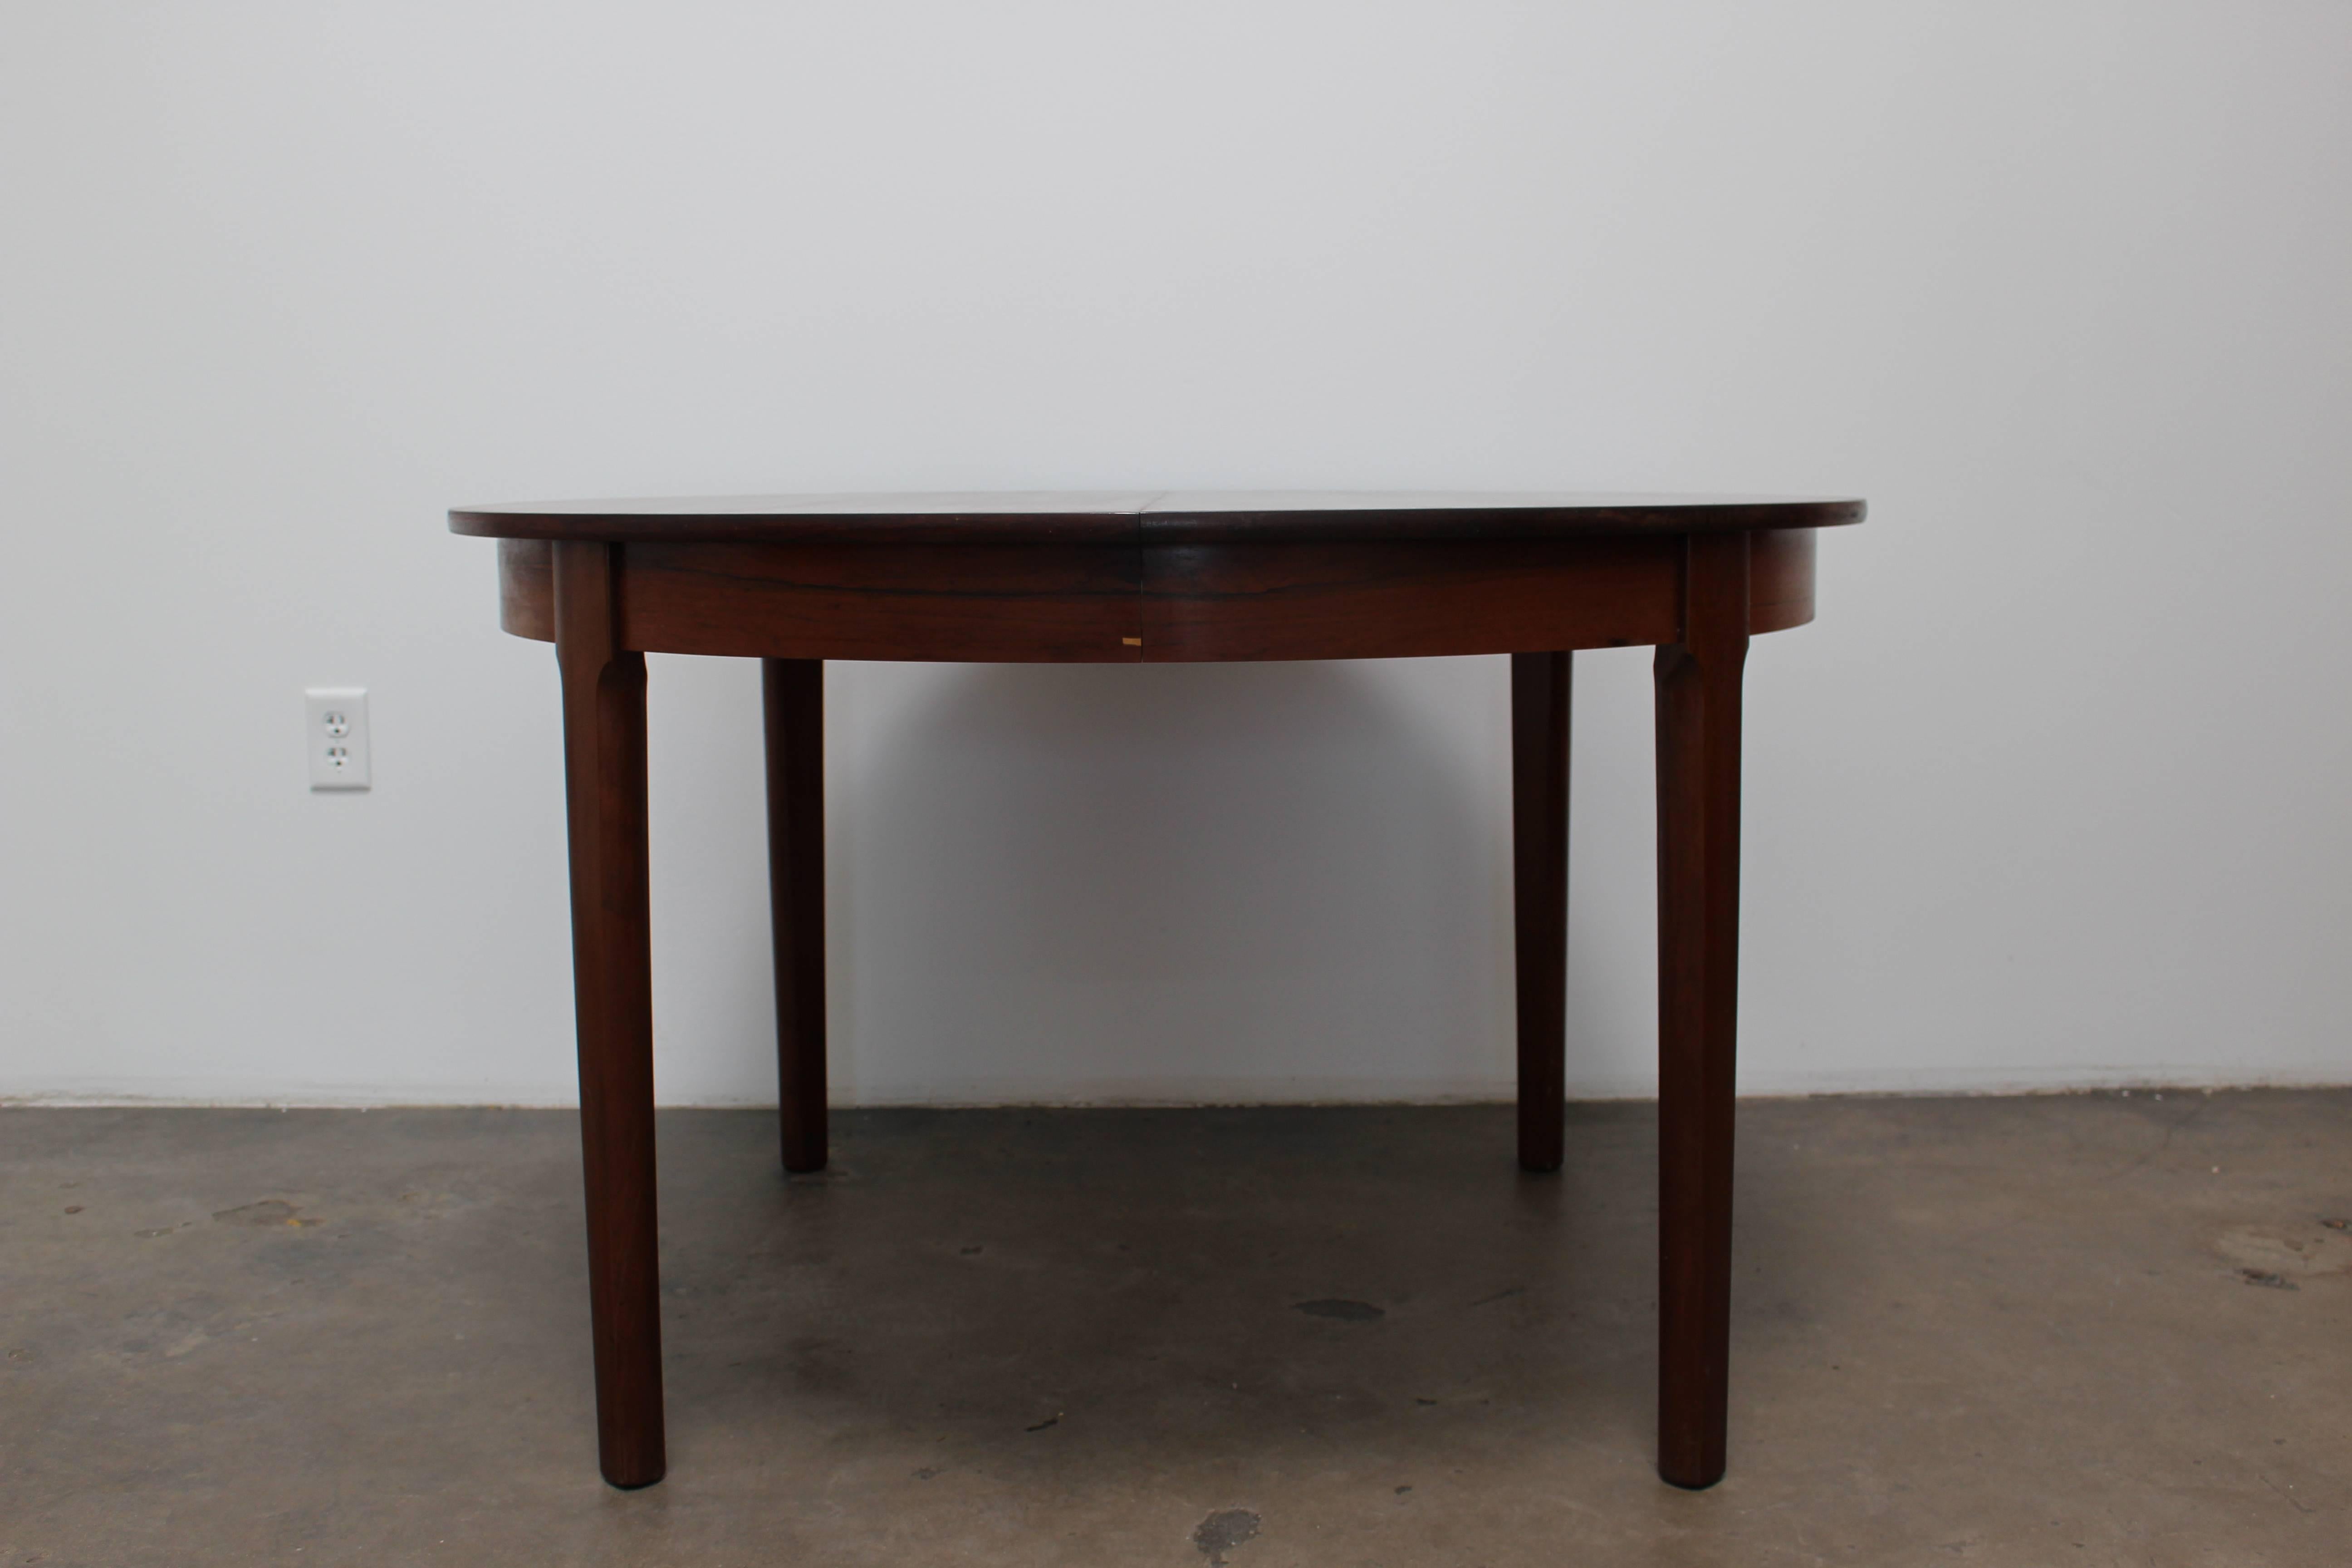 Round rosewood dining table made in the 1950s. The beautiful, simple design of this table is extremely versatile and can transition into any style of home. The rosewood is in good condition, with one chip on the skirt. The grain of the table is